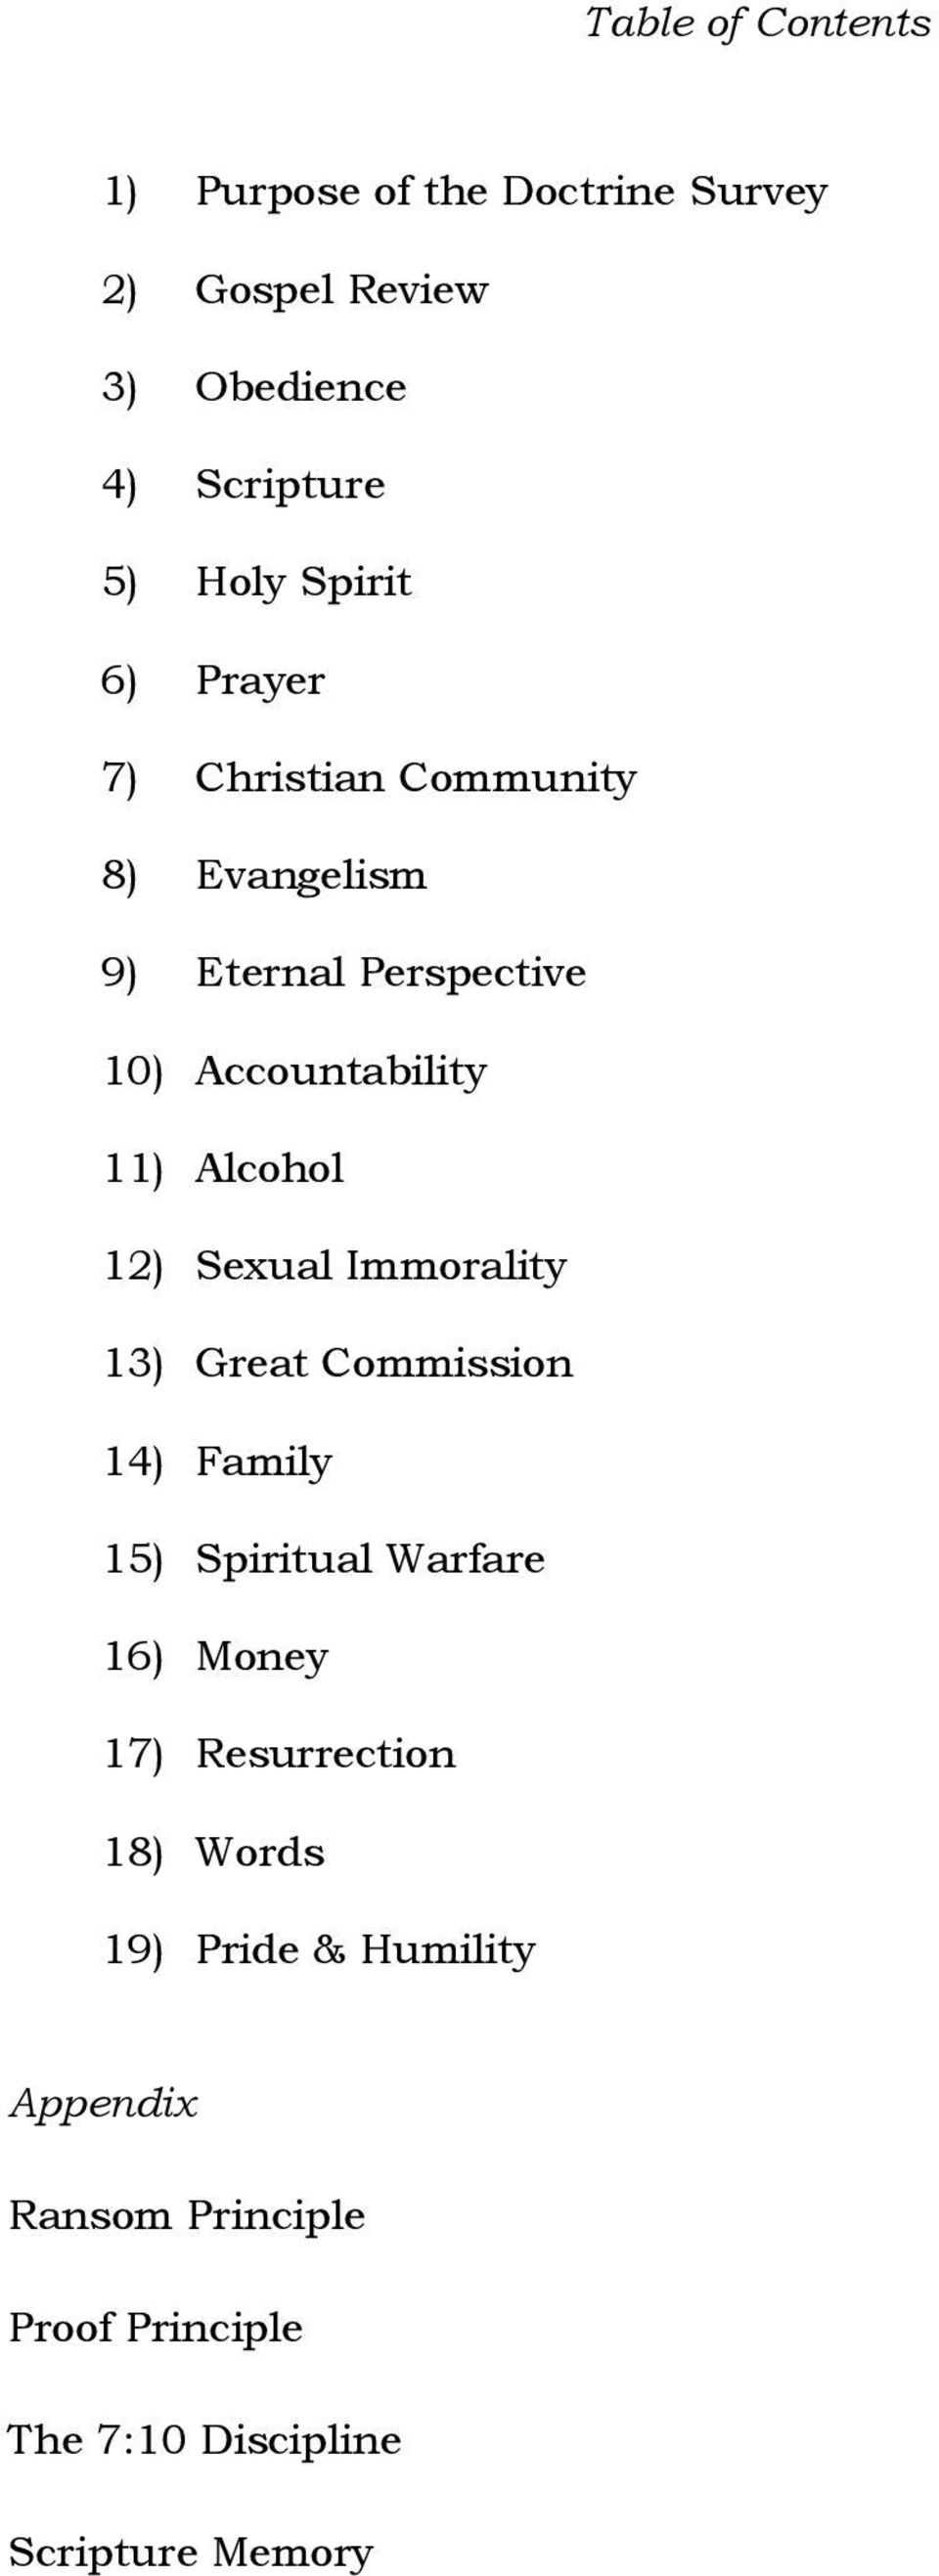 Alcohol 12) Sexual Immorality 13) Great Commission 14) Family 15) Spiritual Warfare 16) Money 17)